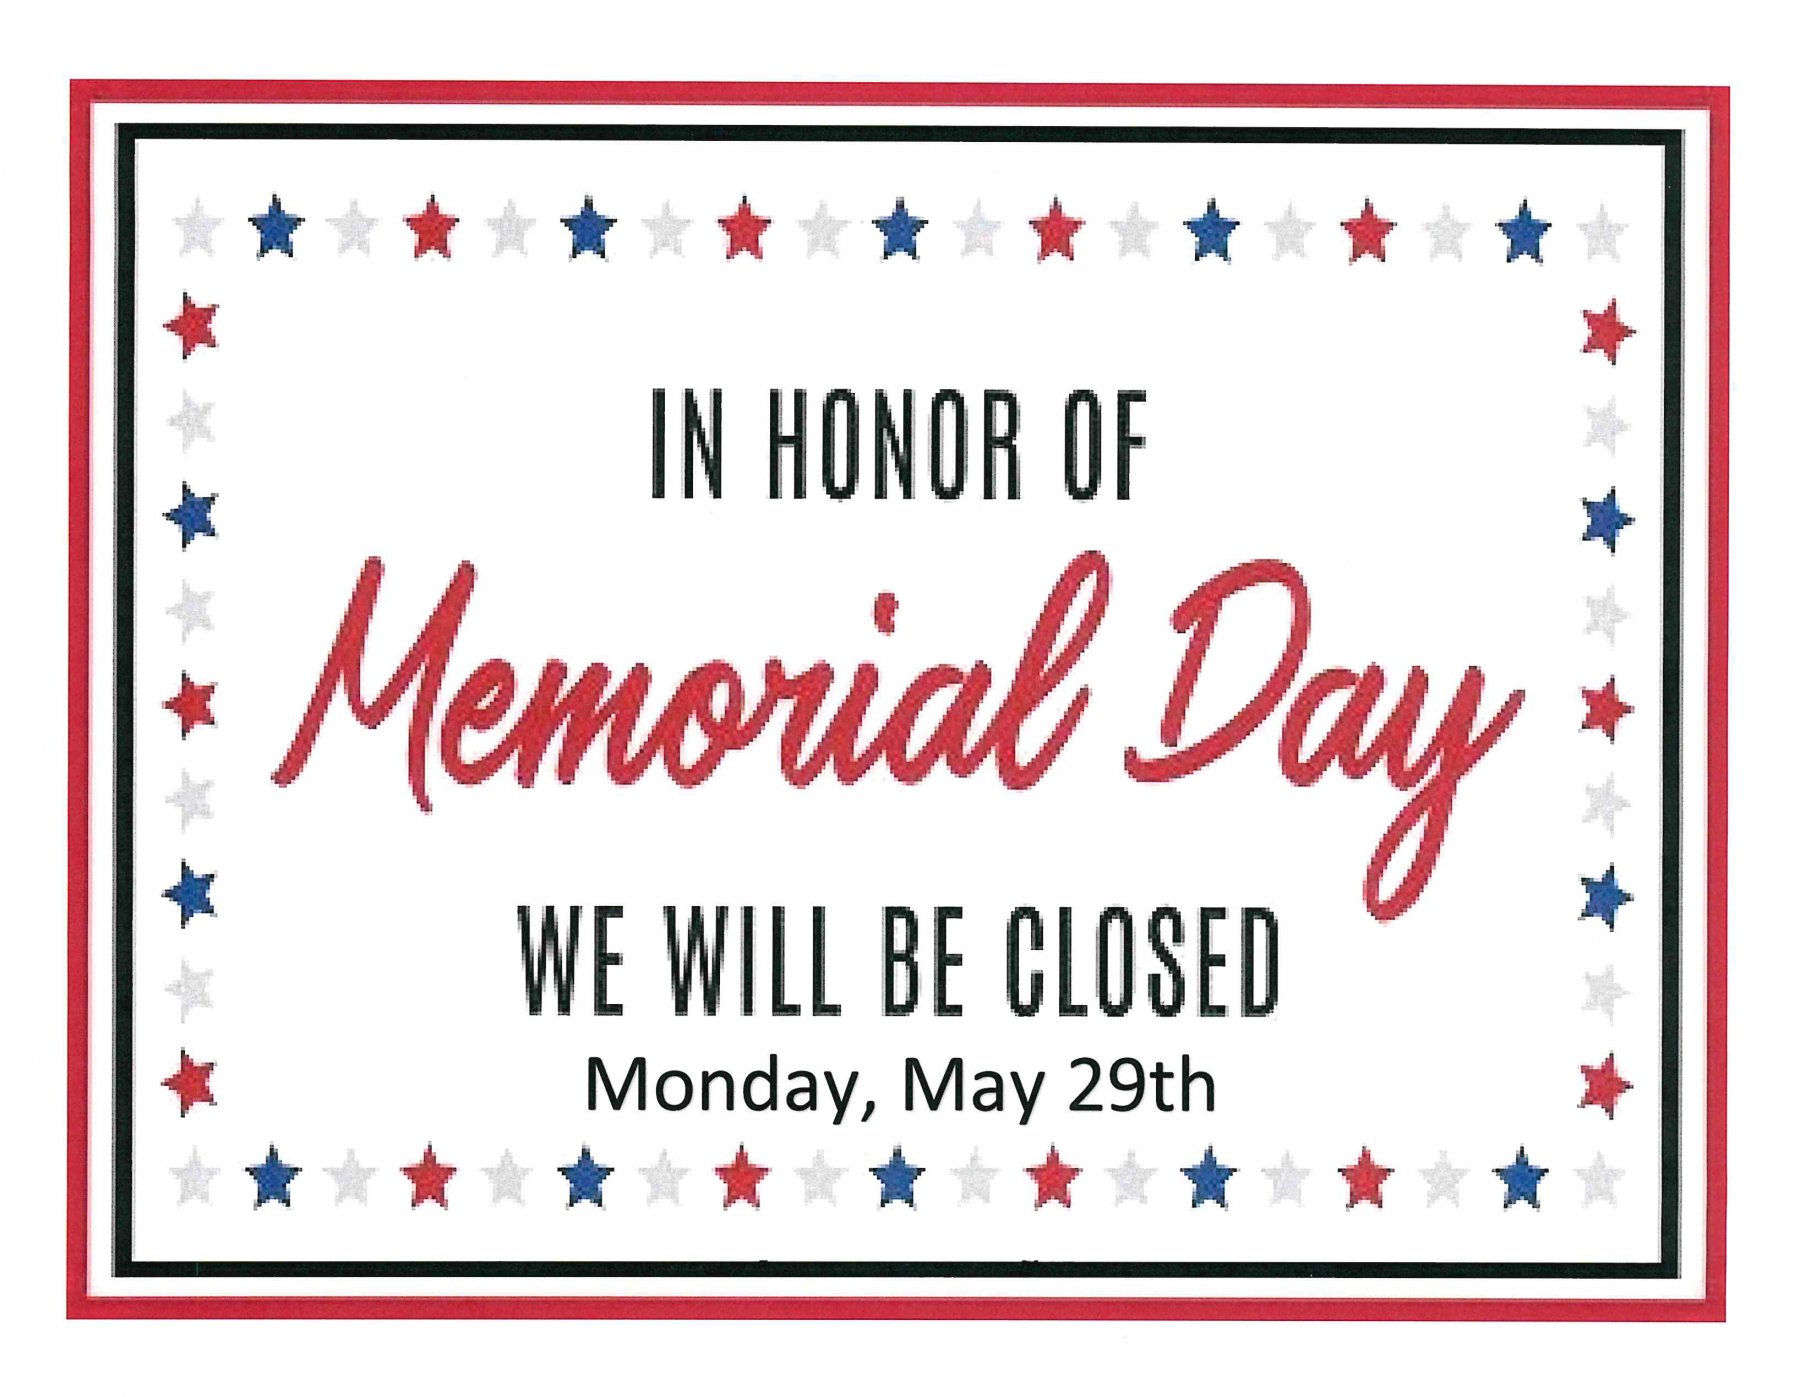 city-hall-office-closed-for-memorial-day-city-of-owen-wi